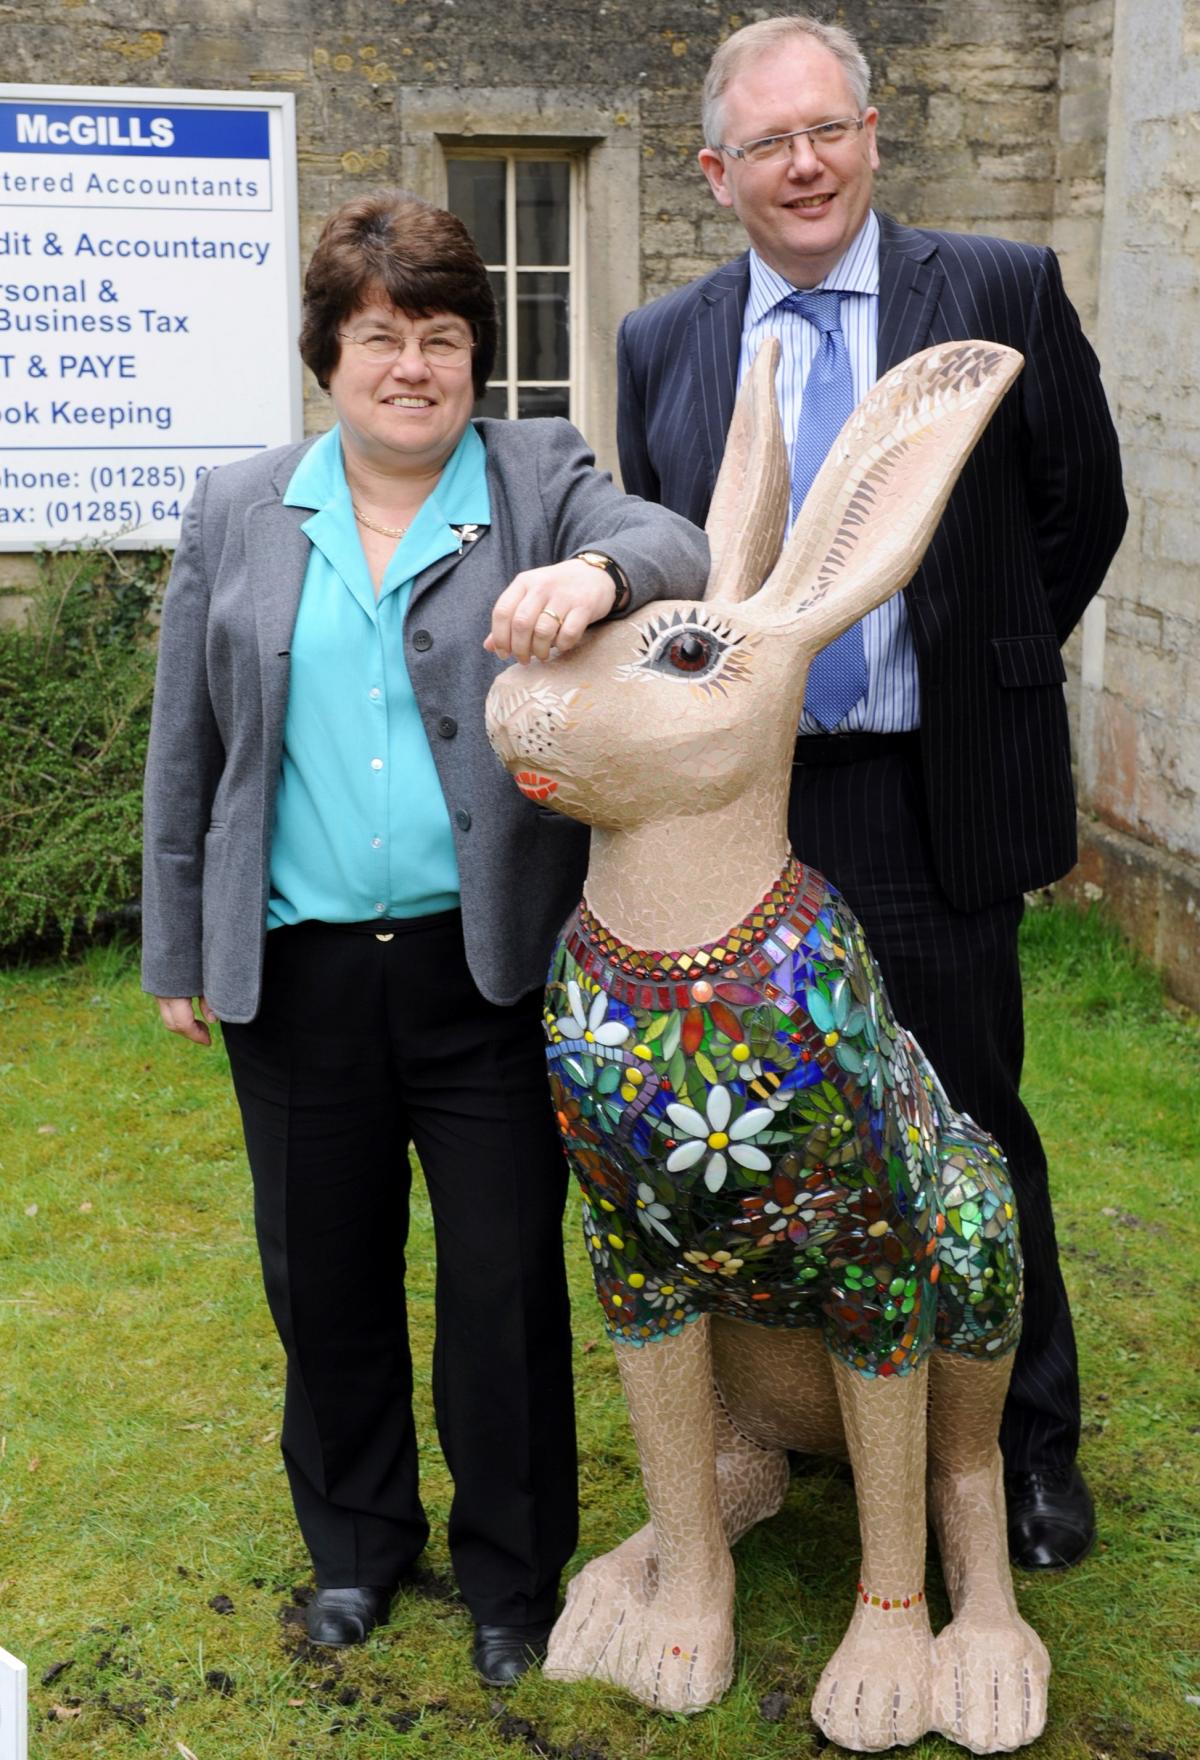 Alison Palmer and Simon Nuttall with Madame Butterfly hare by Debbie Stirling at McGills accountants in Cirencester